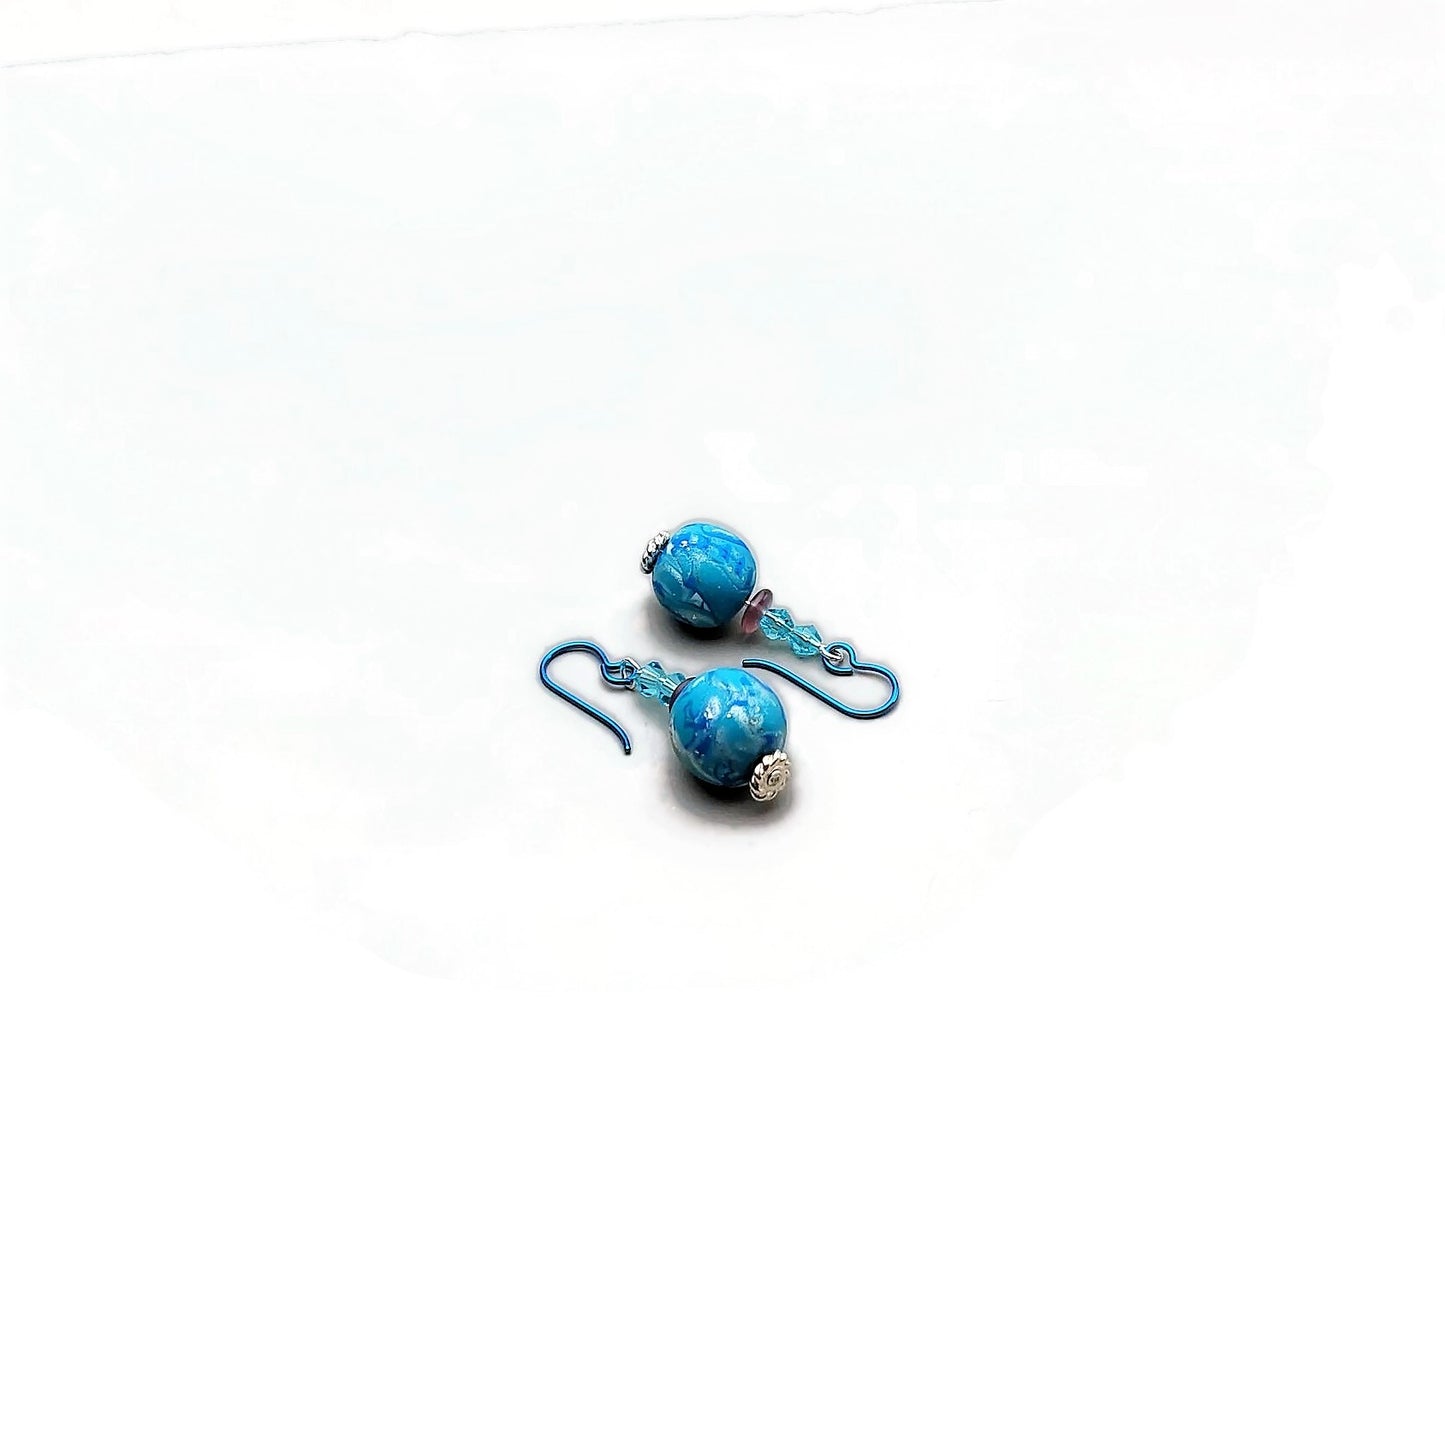 Polymer clay bead and crystal drop earrings with teal niobium ear wires on white background